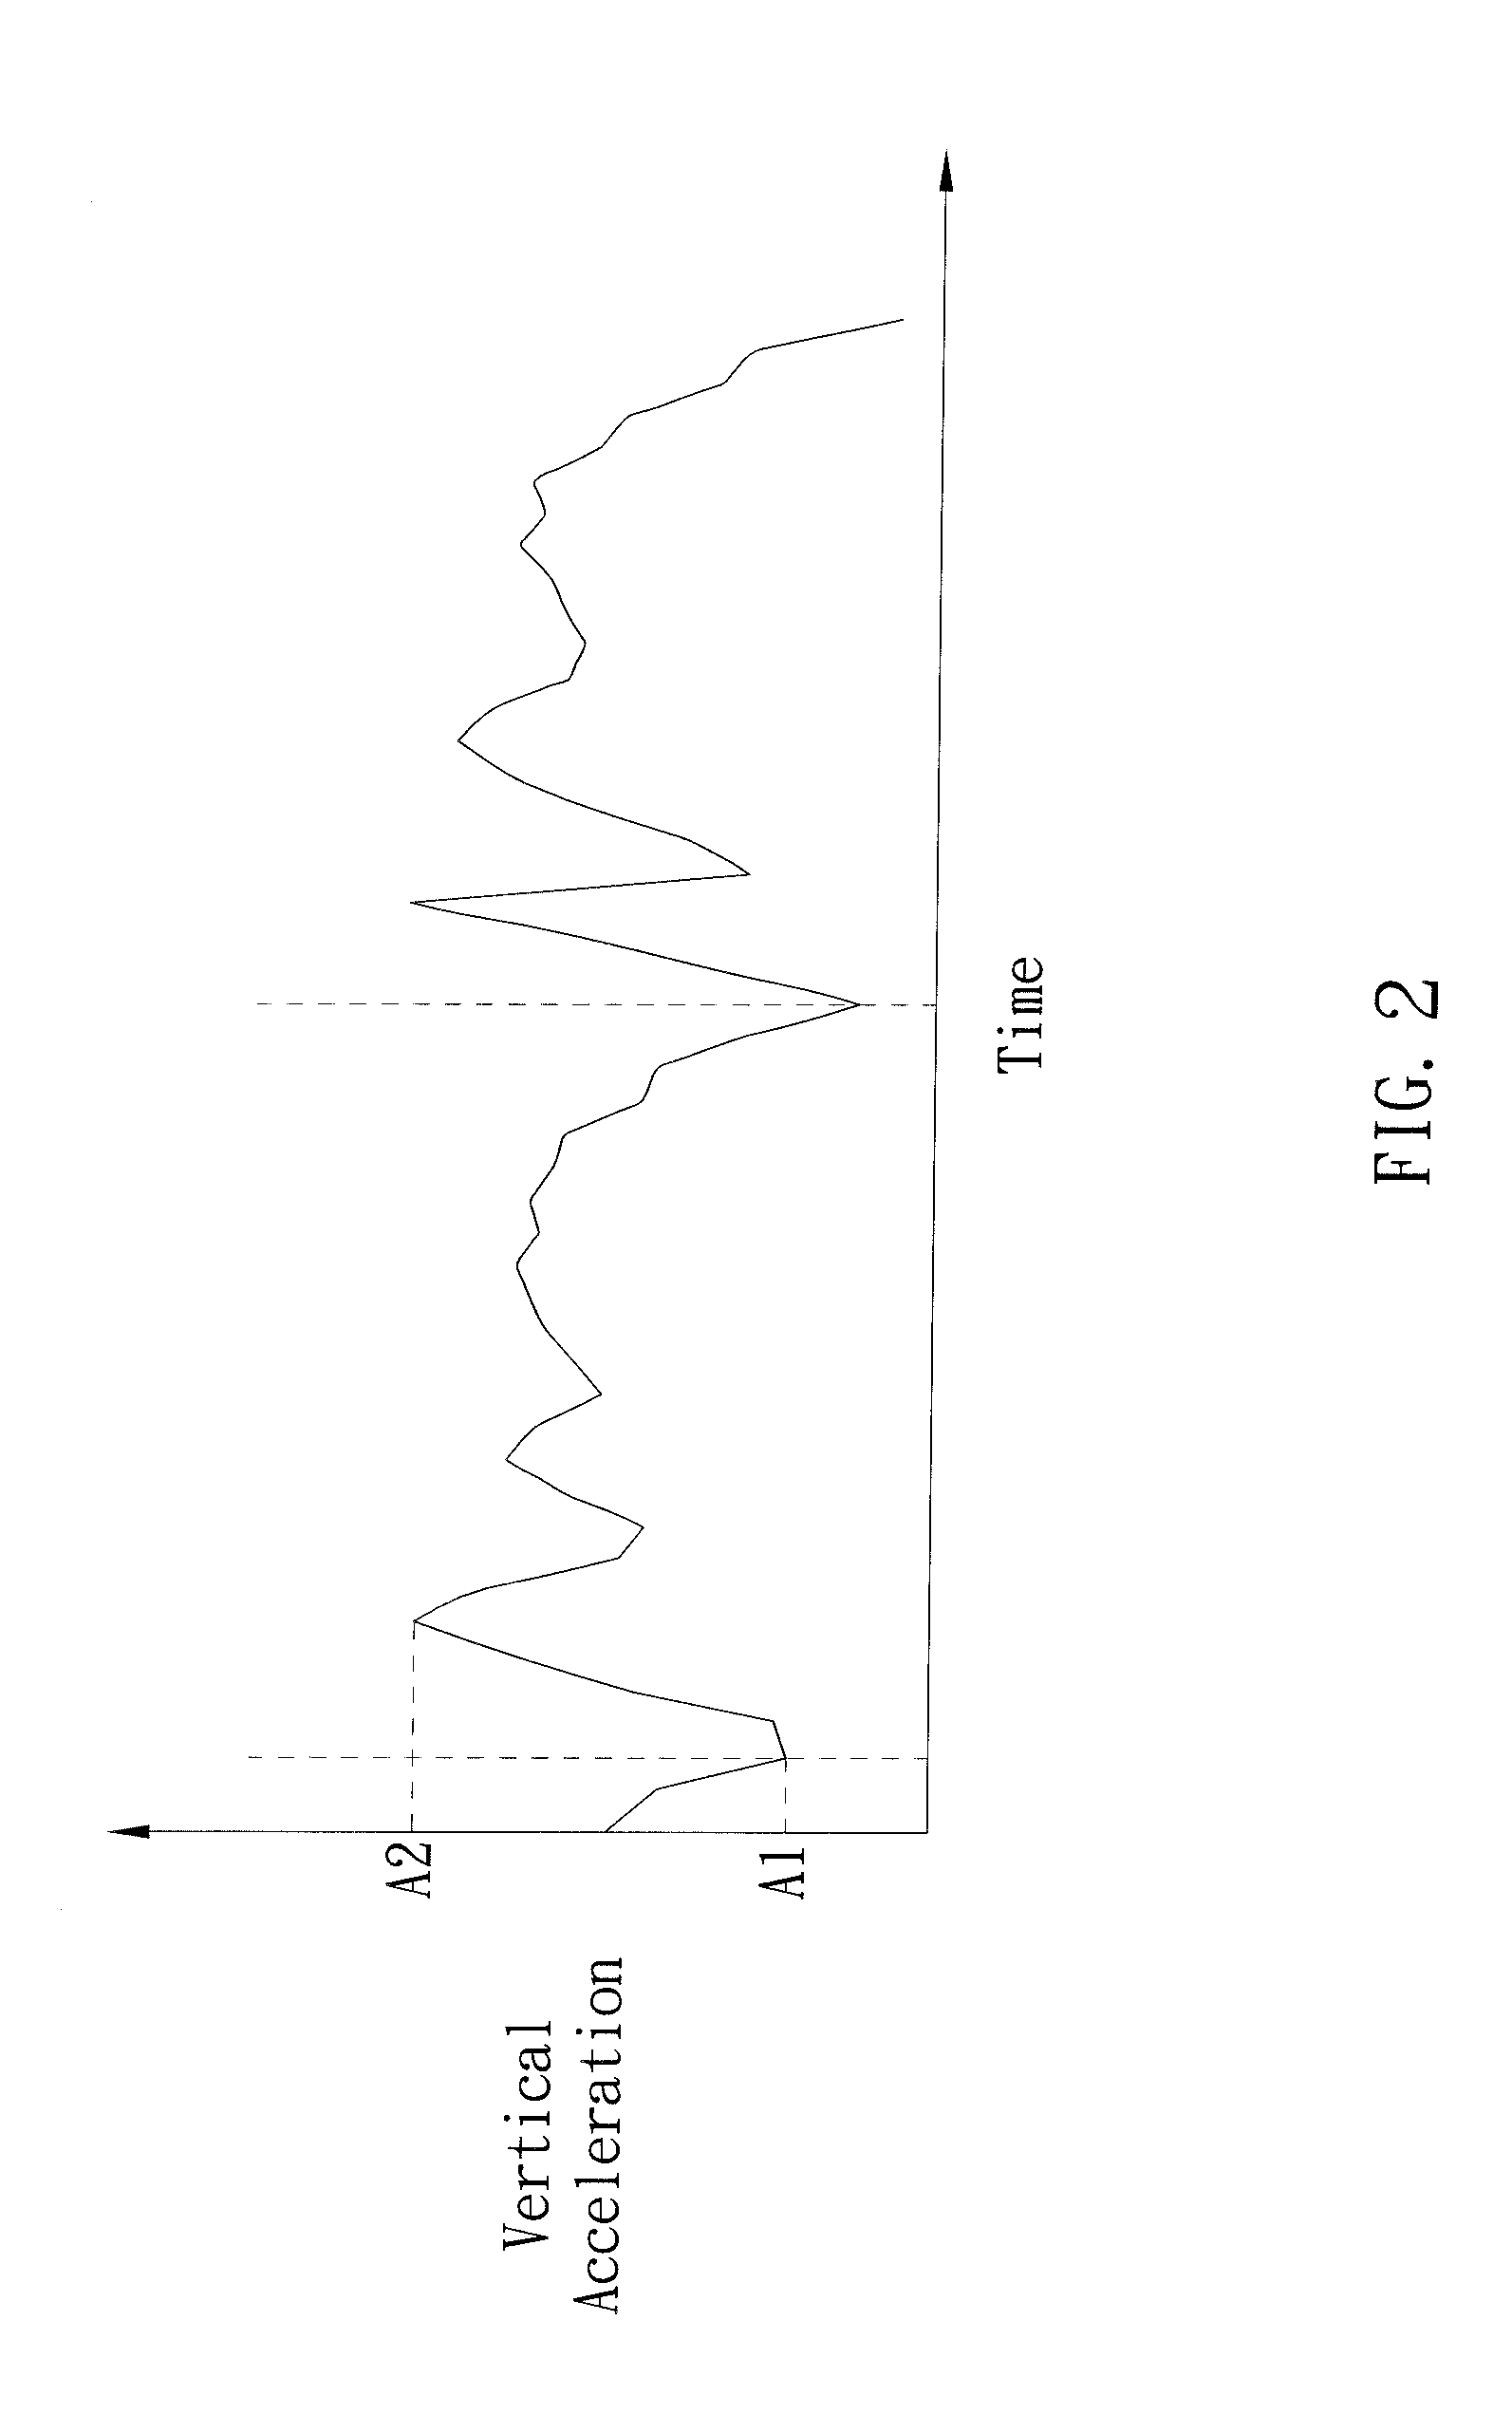 Method of calculating step length